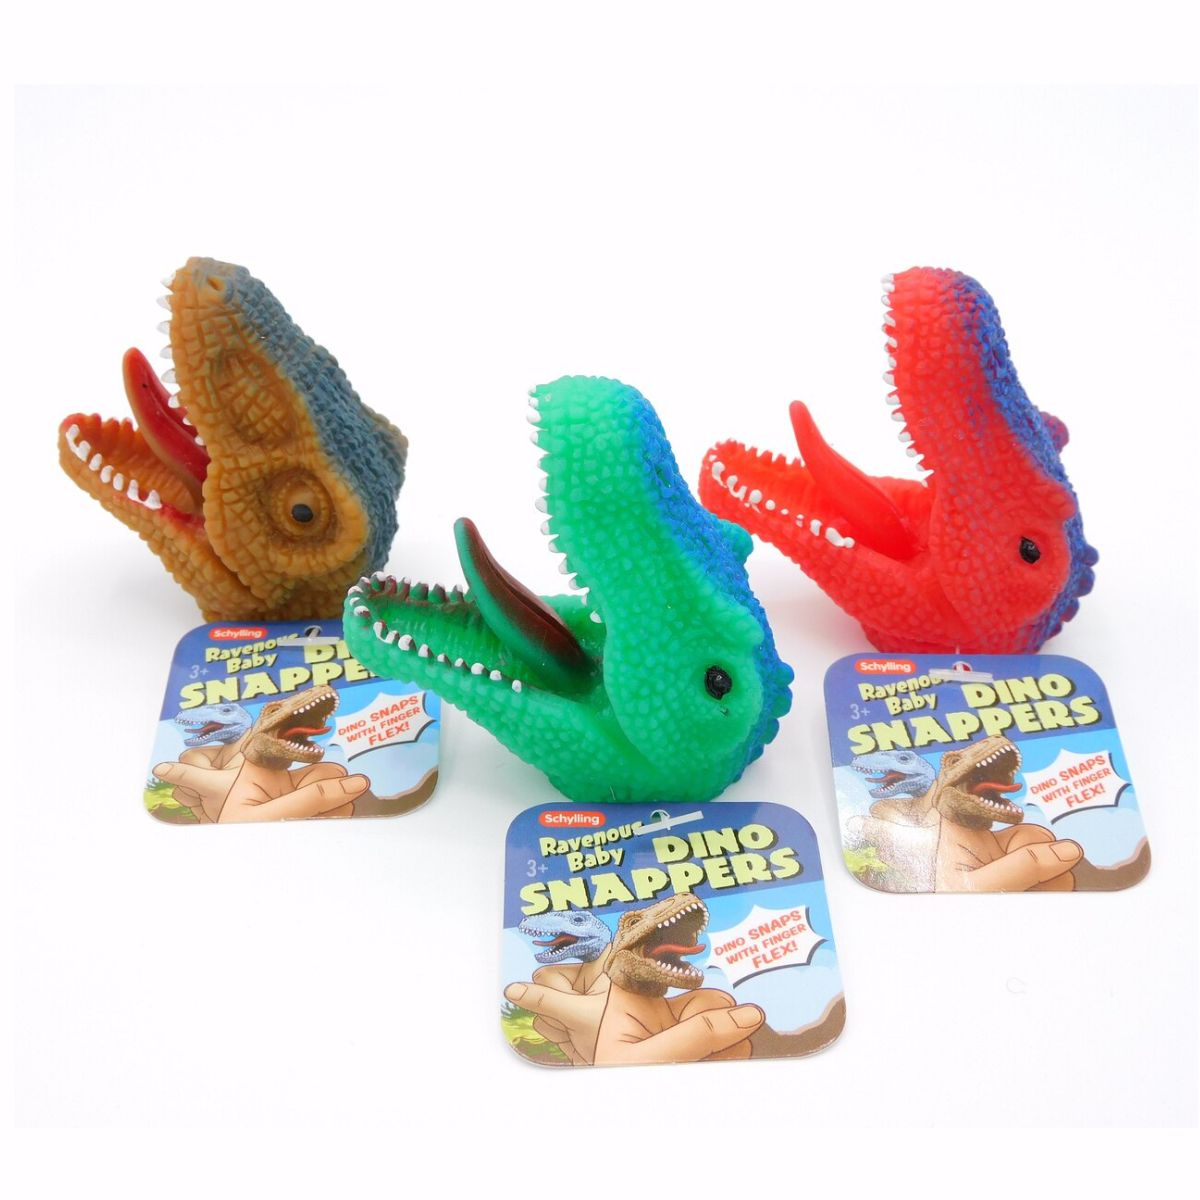 Schylling Baby Dino Snappers